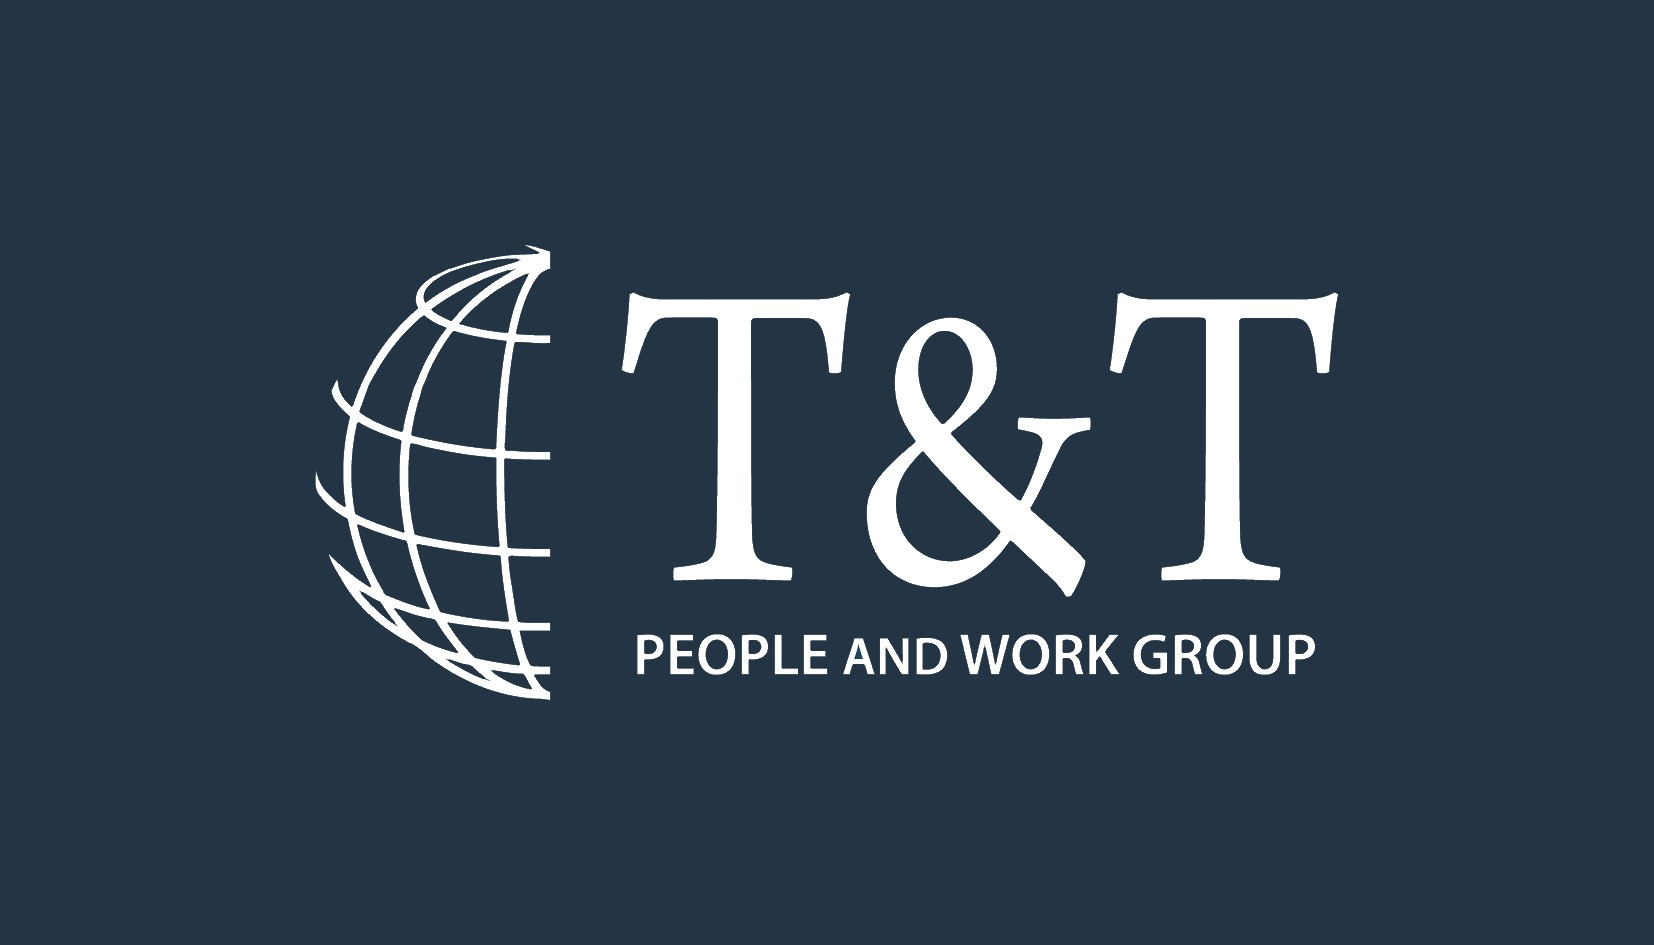 Top logo T&T - People and work group